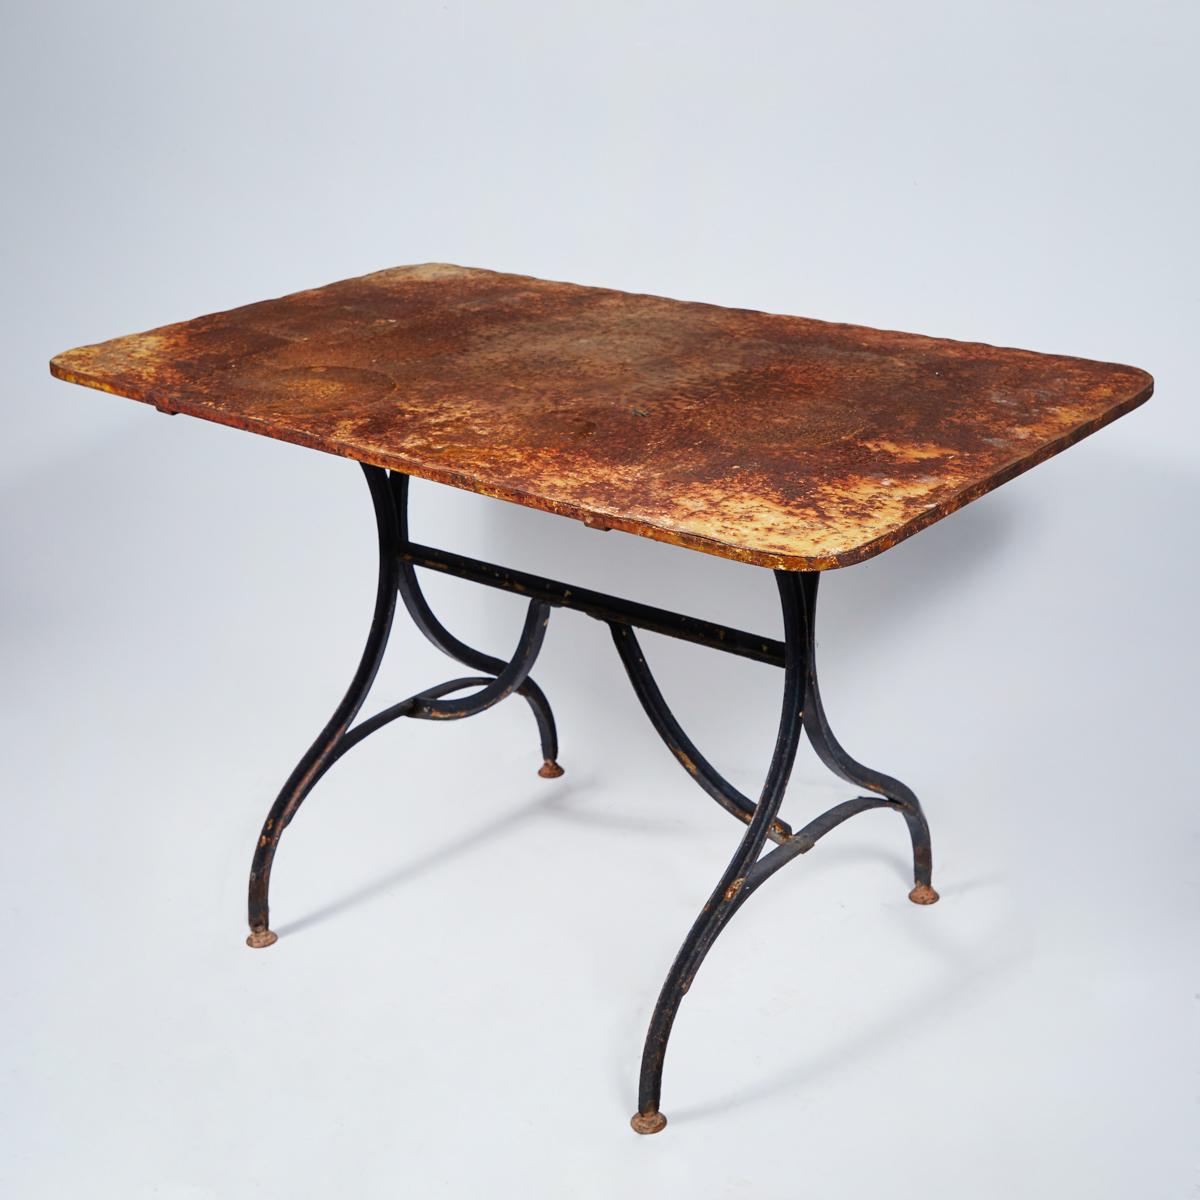 French Late 19th Century Yellow Garden Table with Natural Patina on Iron Trestle Base For Sale